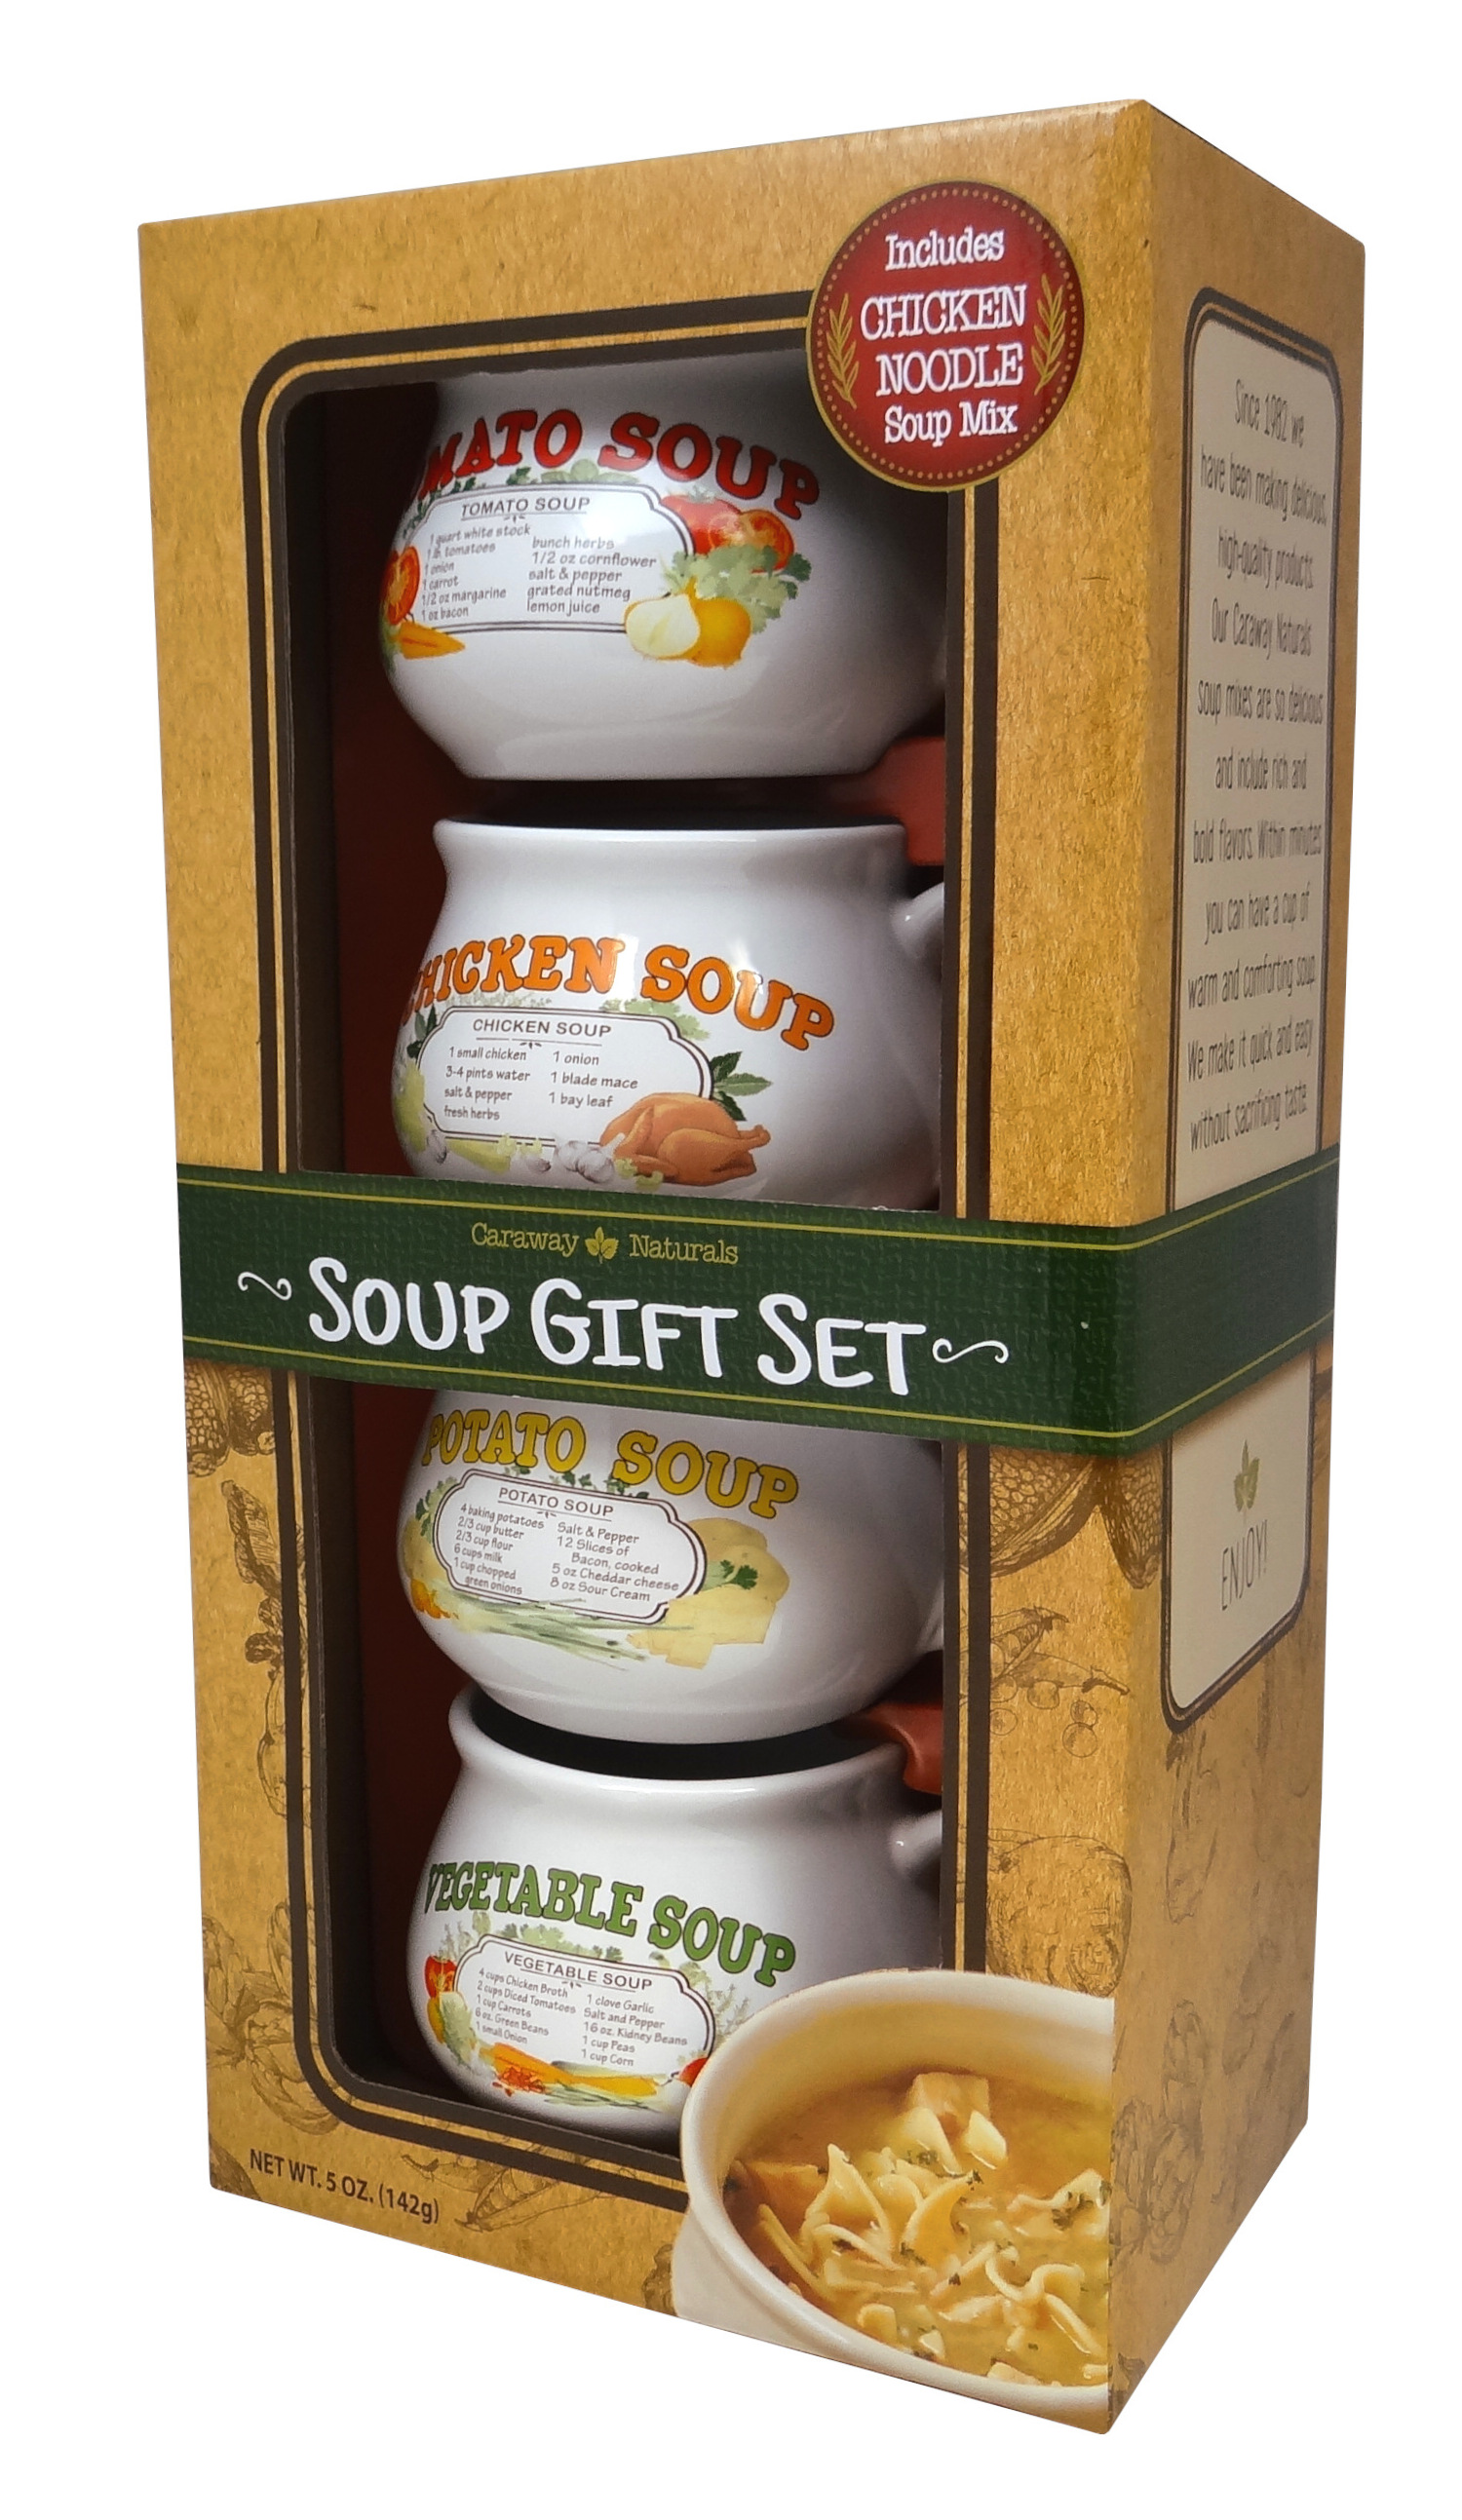 Nostalgic Soup Bowls Box Gift Set with Chicken Noodle Soup Mix by Caraway Naturals, 5oz, 1ct - image 2 of 11